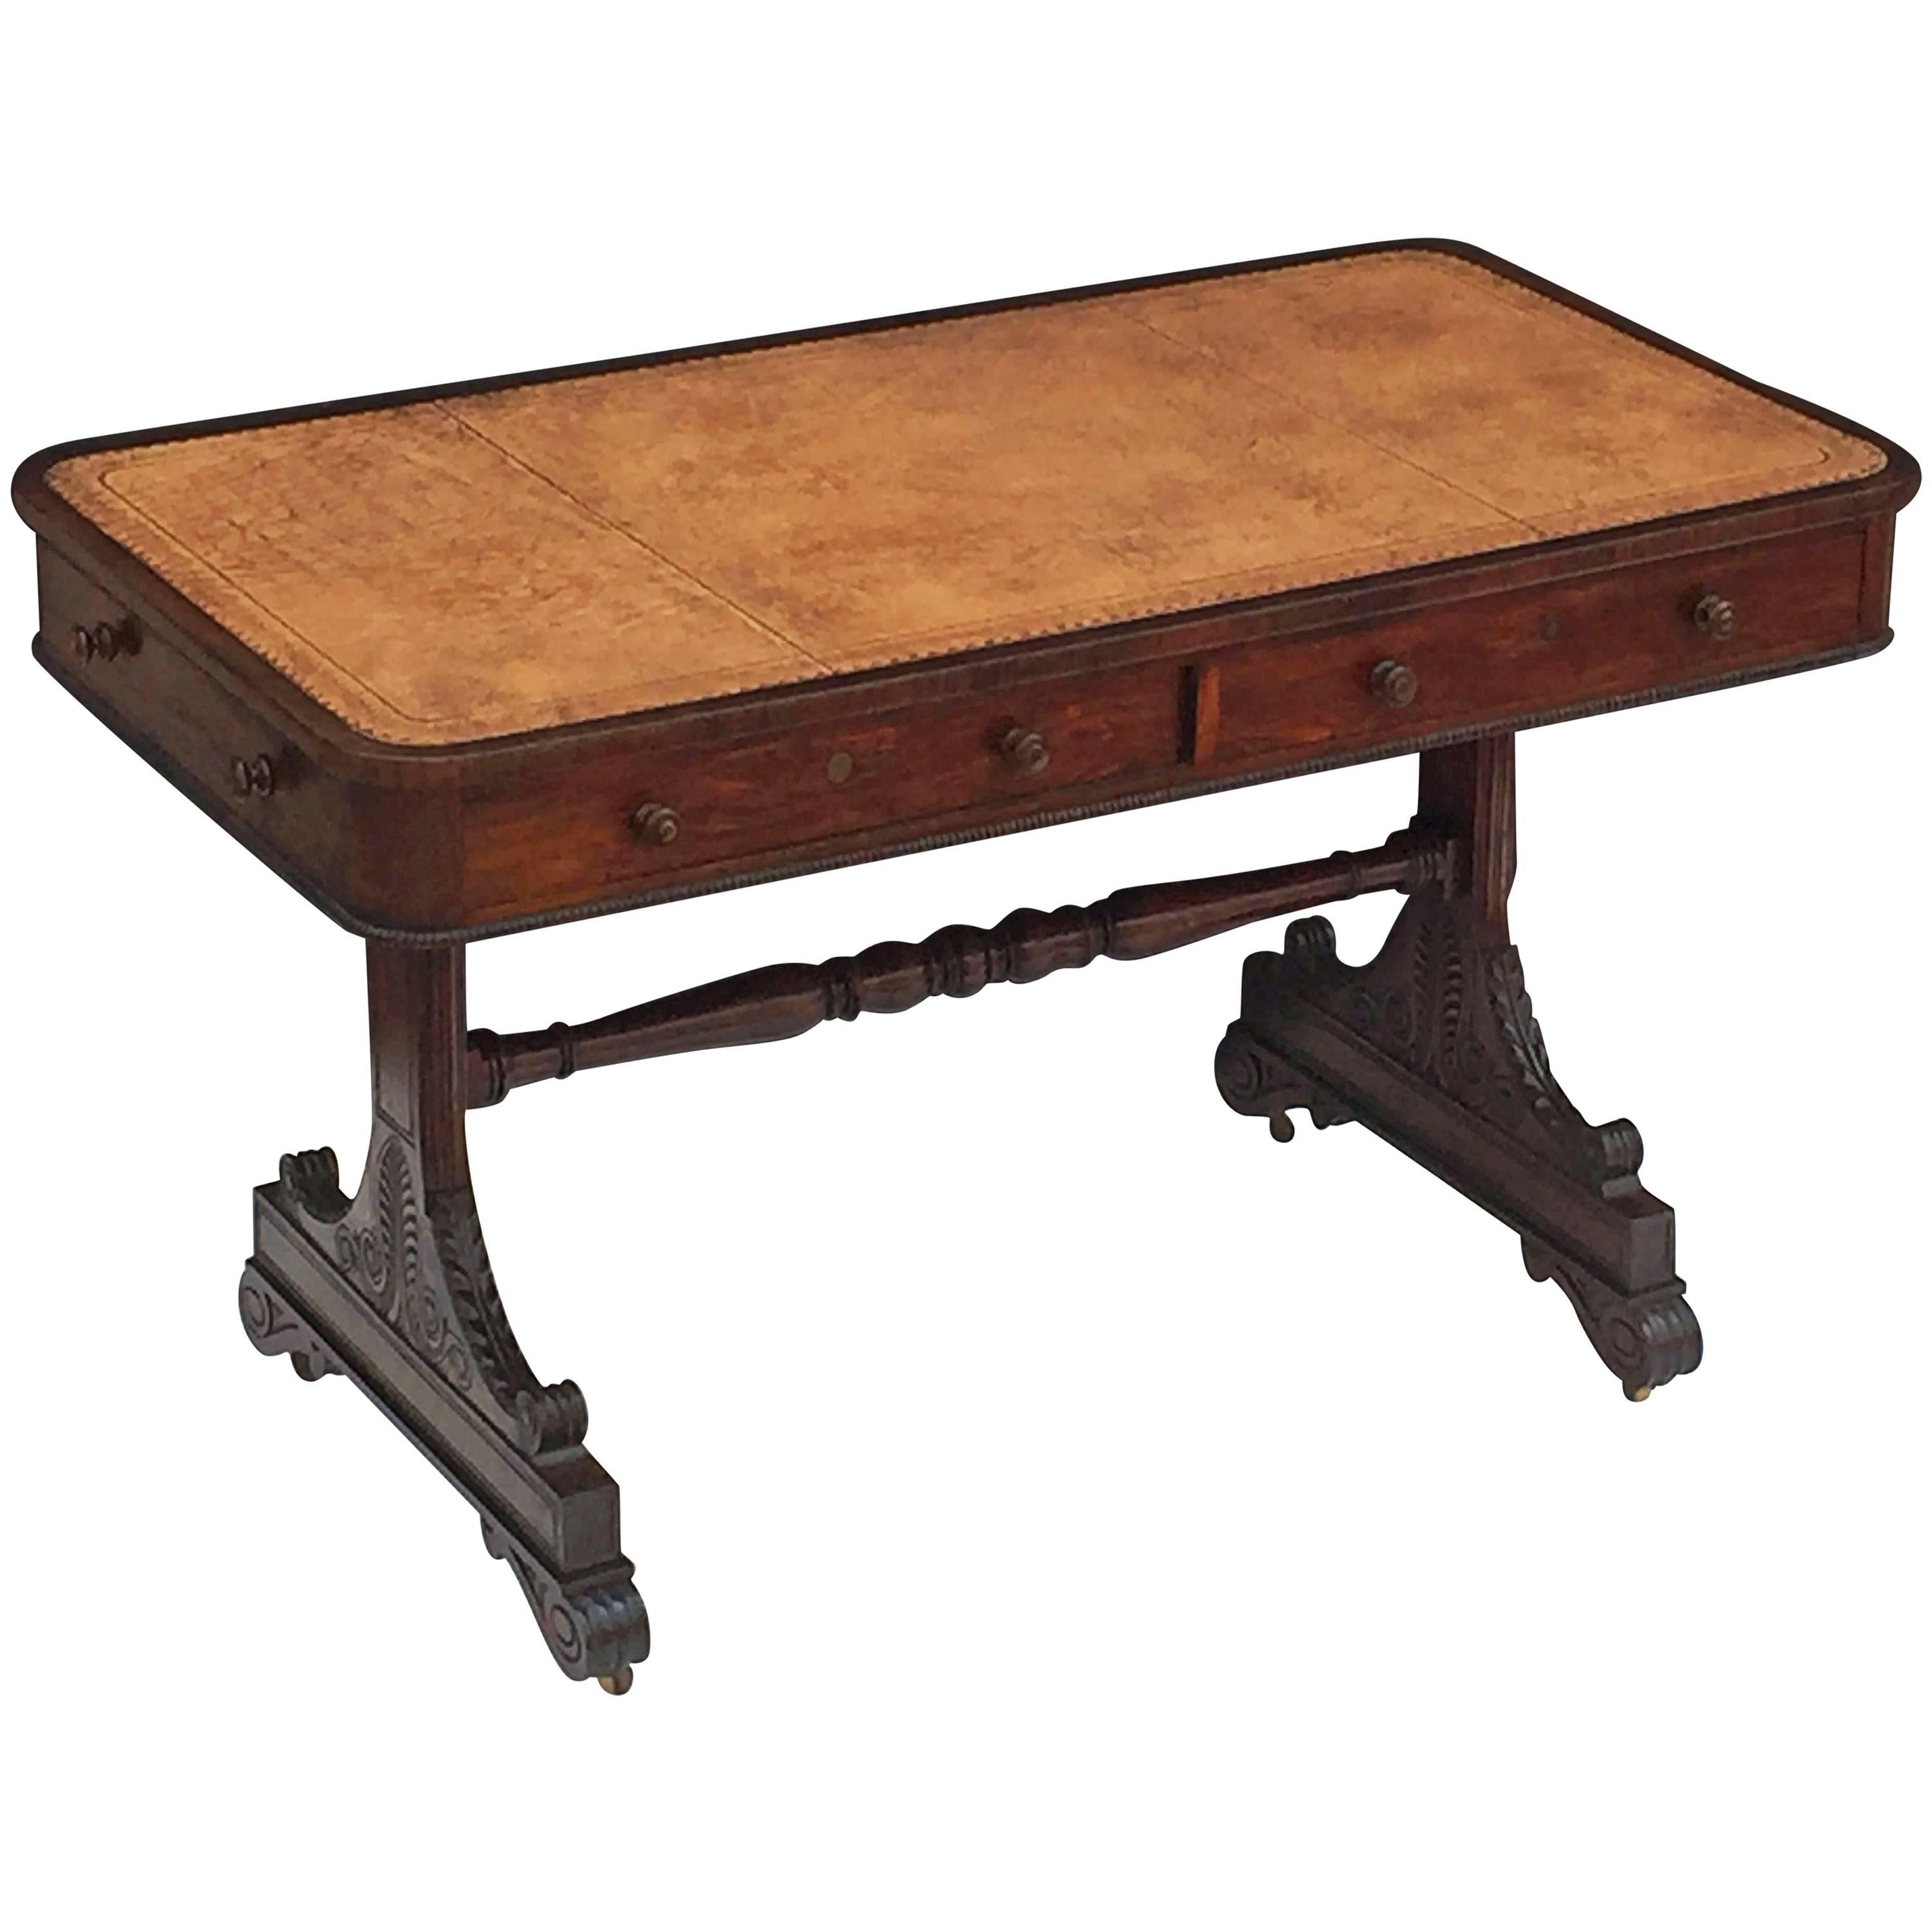 Scottish Library Table or Writing Desk with Leather Top from the Regency Era